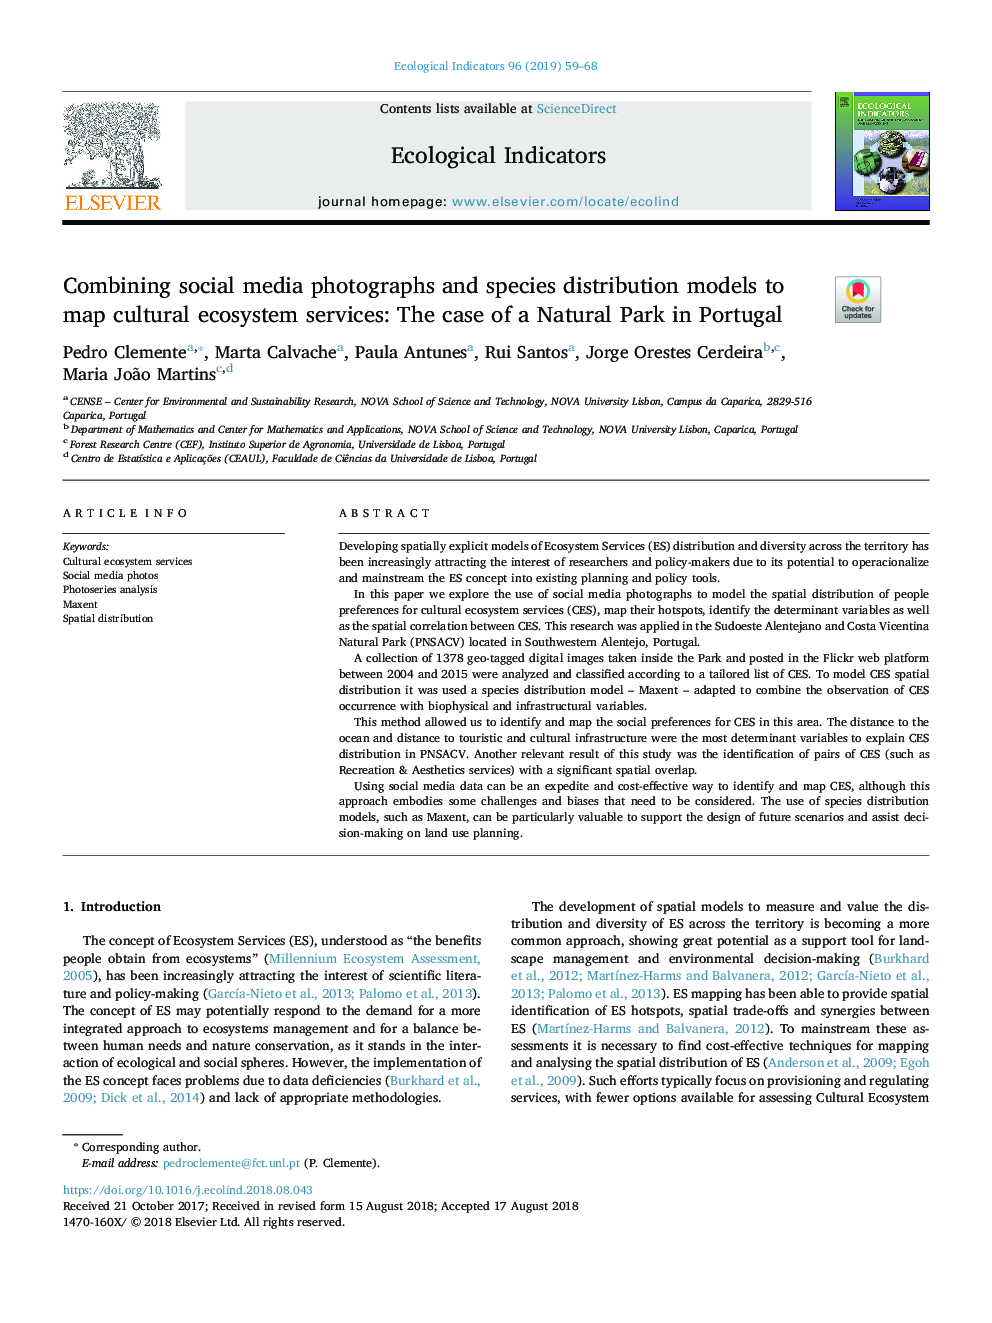 Combining social media photographs and species distribution models to map cultural ecosystem services: The case of a Natural Park in Portugal